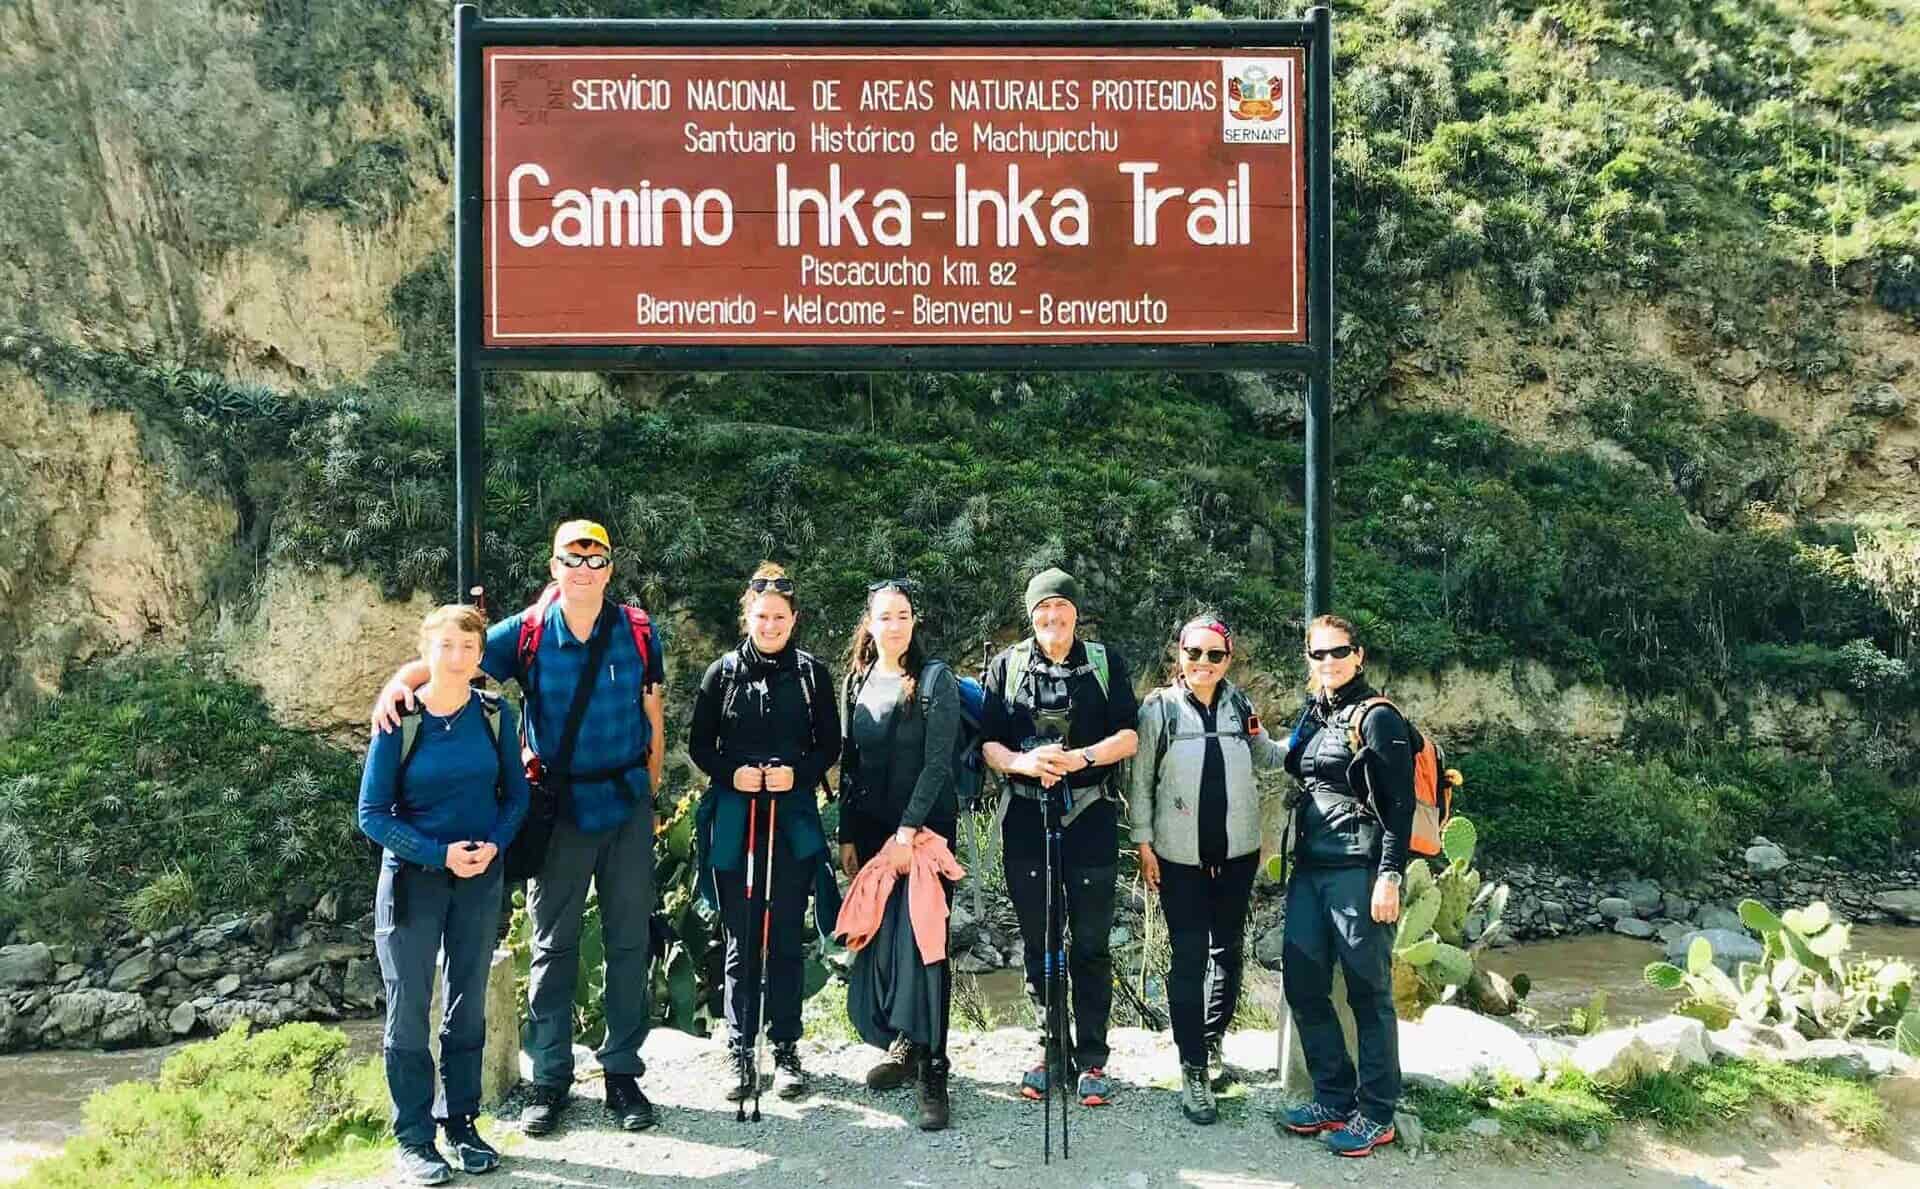 Where does the Inca Trail start?